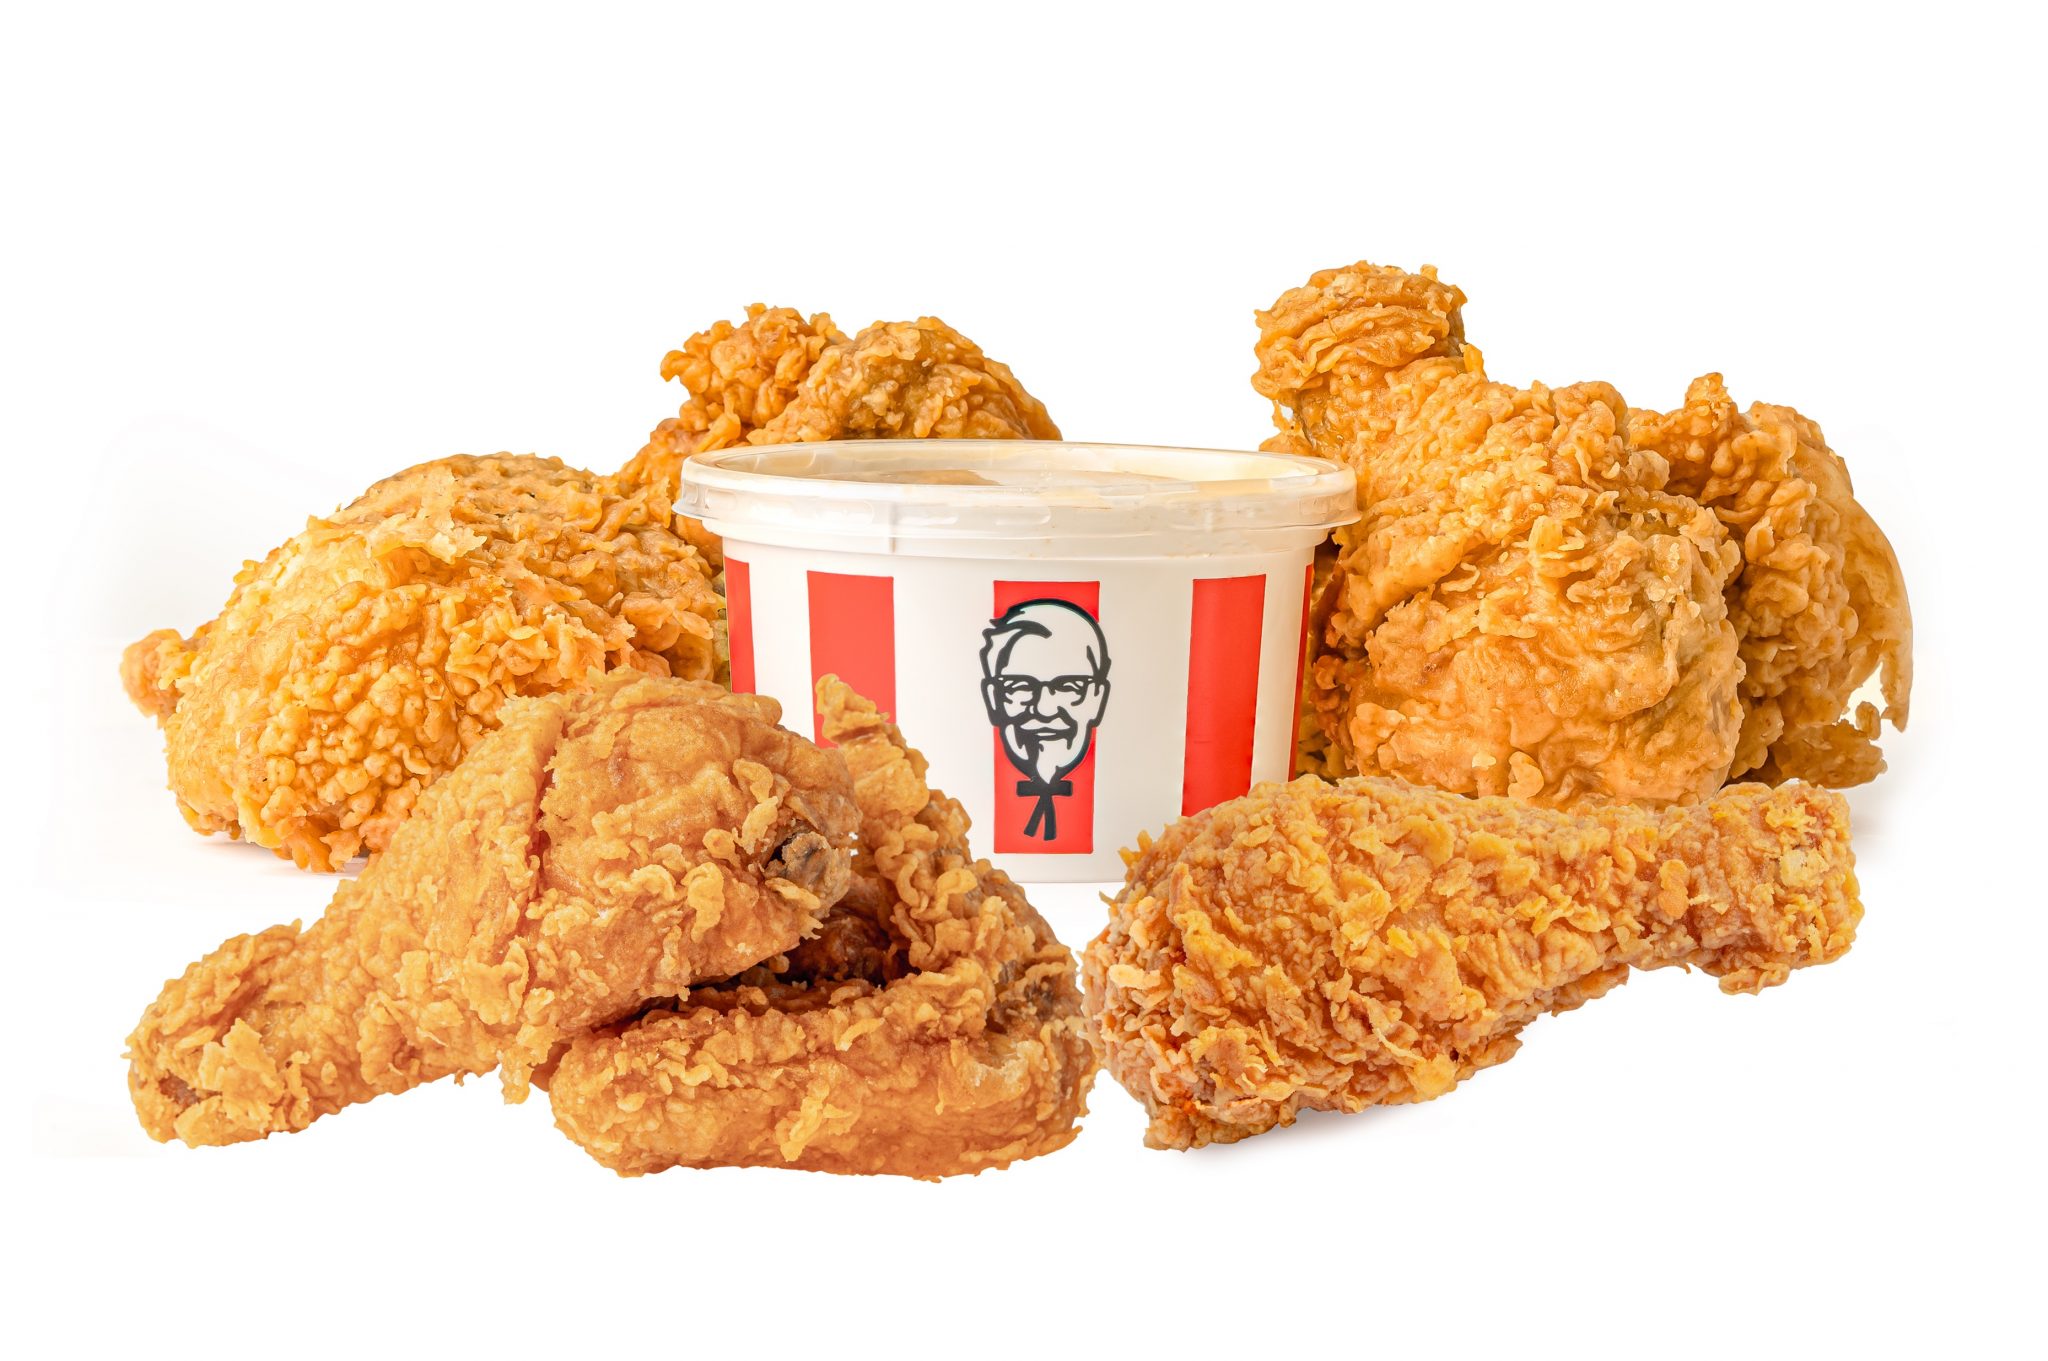 Who Invented Fried Chicken?